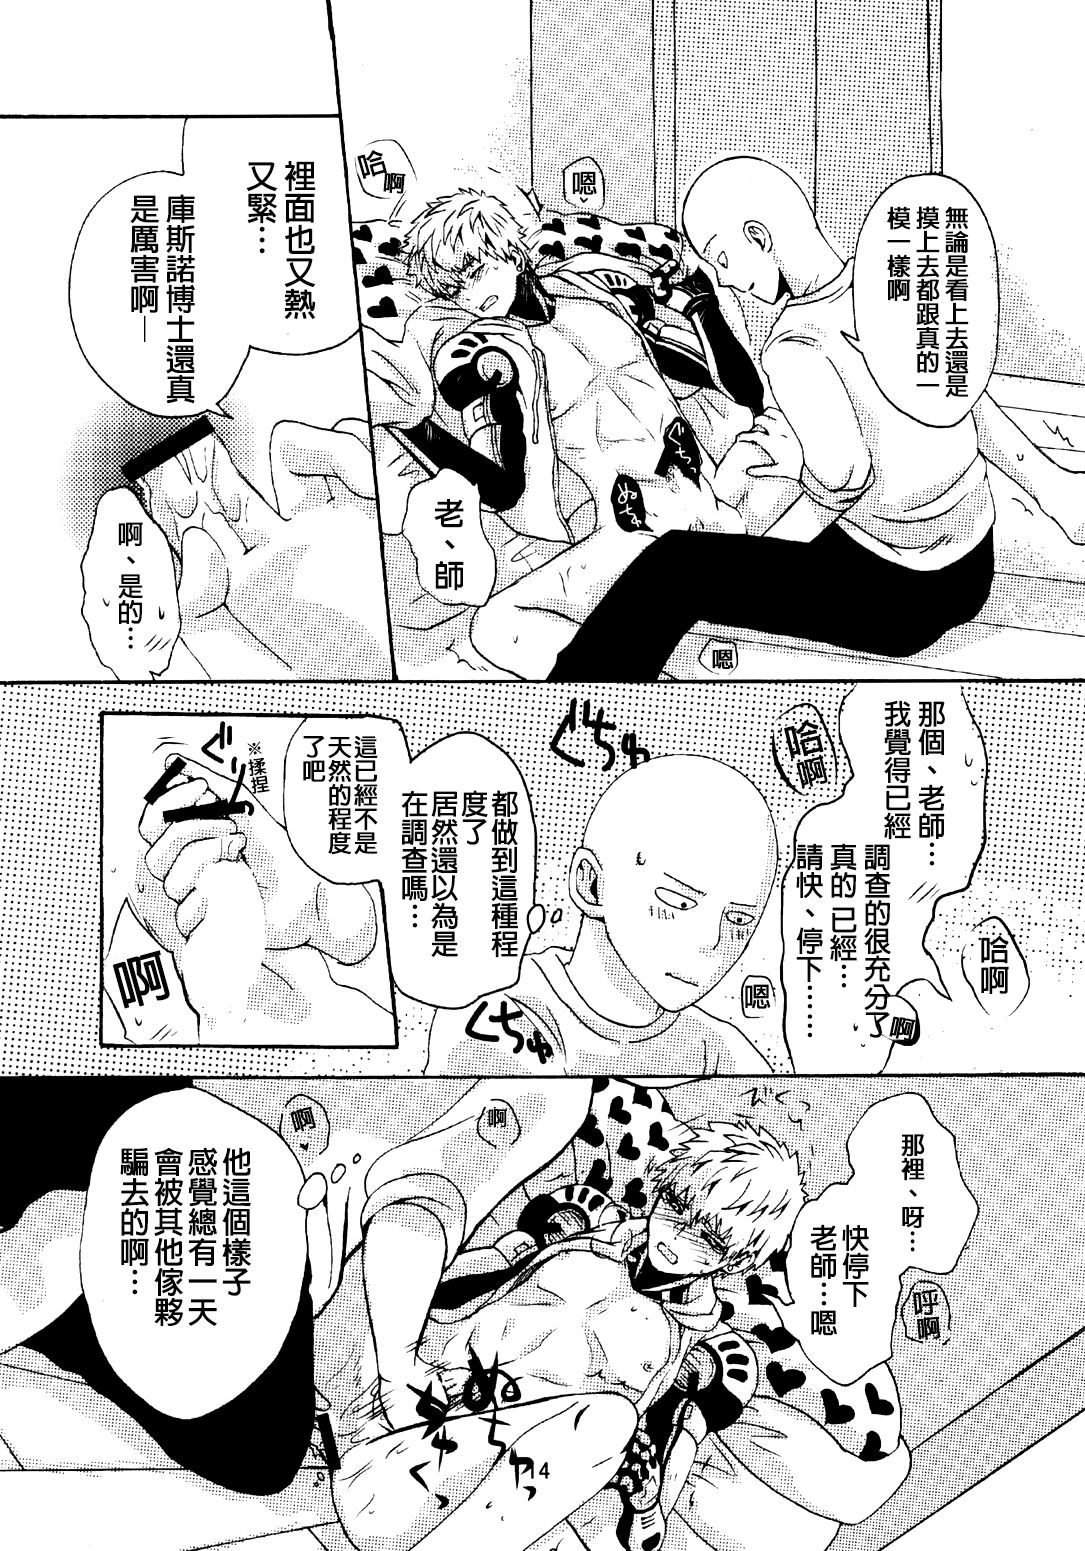 [S×G (Kobato)] NATURAL JUNKIE (One Punch Man) [Chinese] [沒有漢化] [S×G (こばと)] NATURAL JUNKIE (ワンパンマン) [中国翻訳]